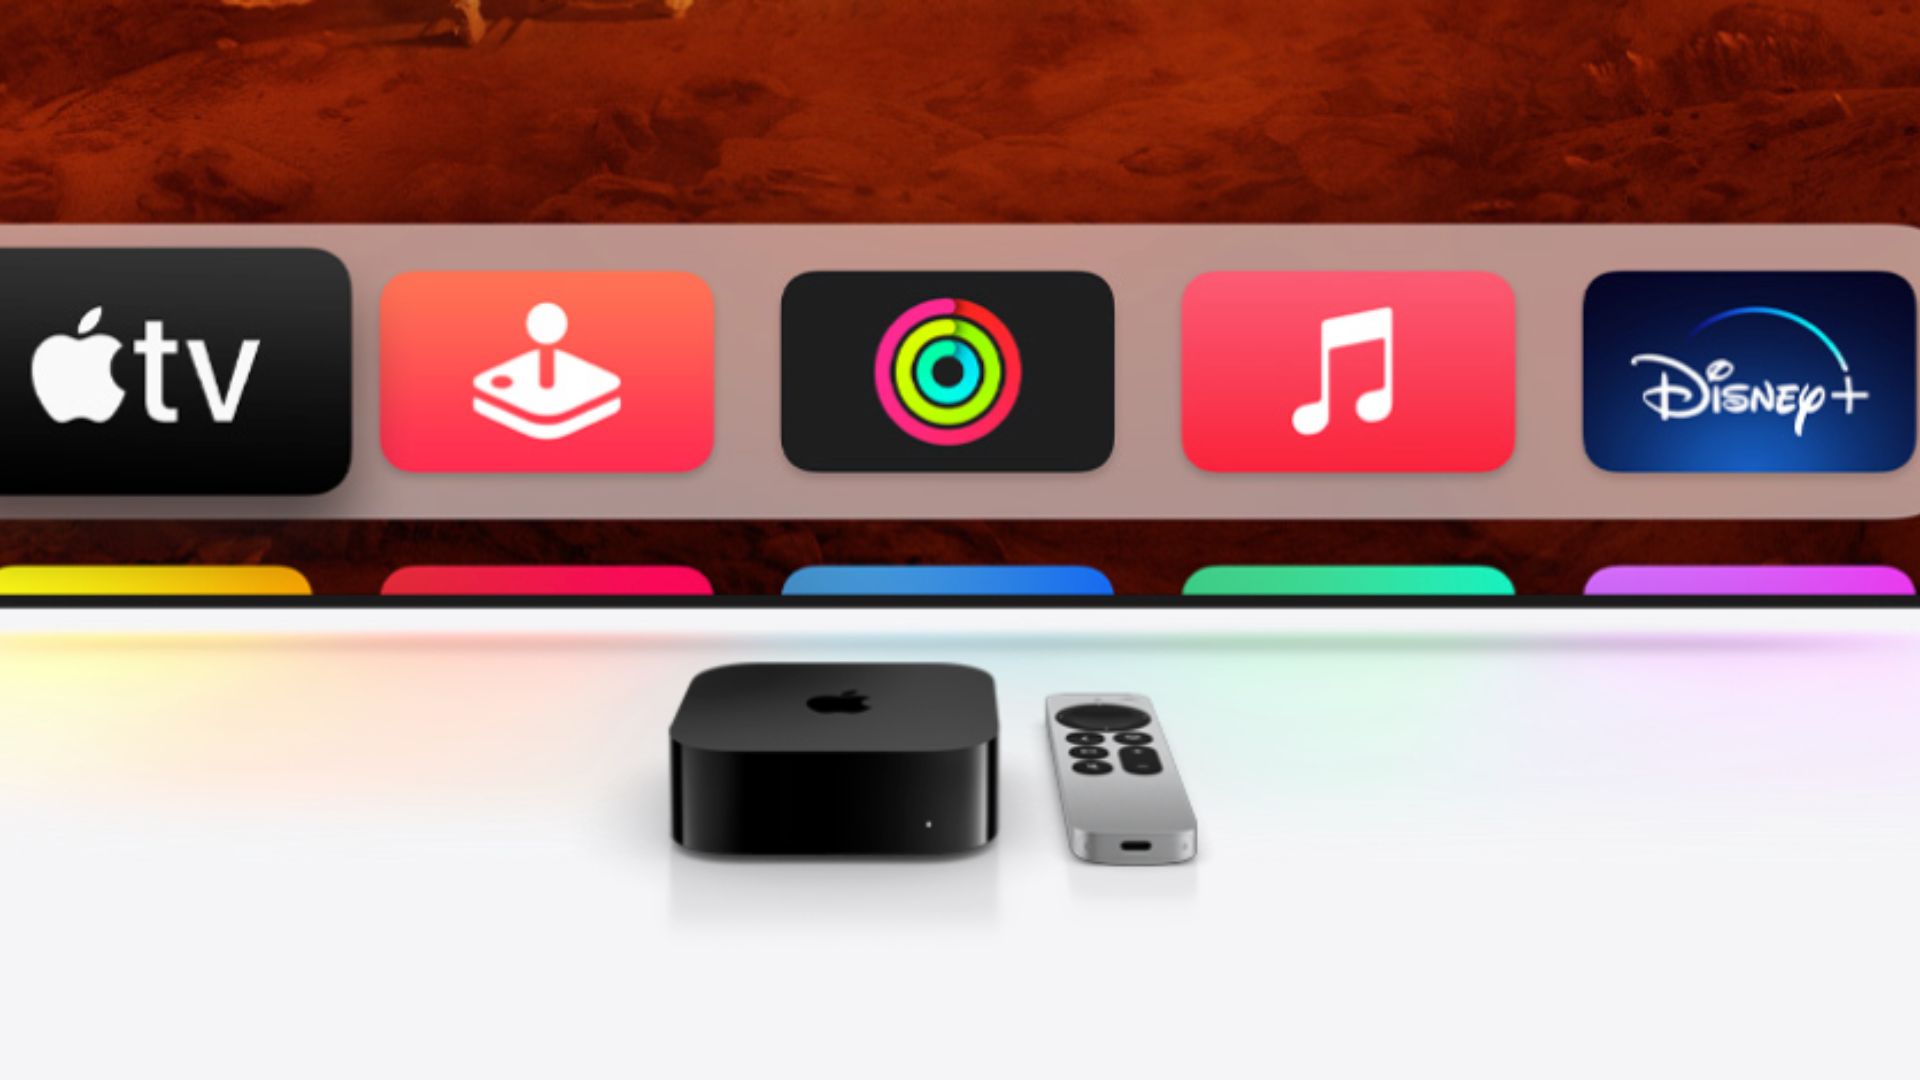 ned tvilling tøj Apple TV 4K 2022: Specs, price, model differences, release date and more |  iMore